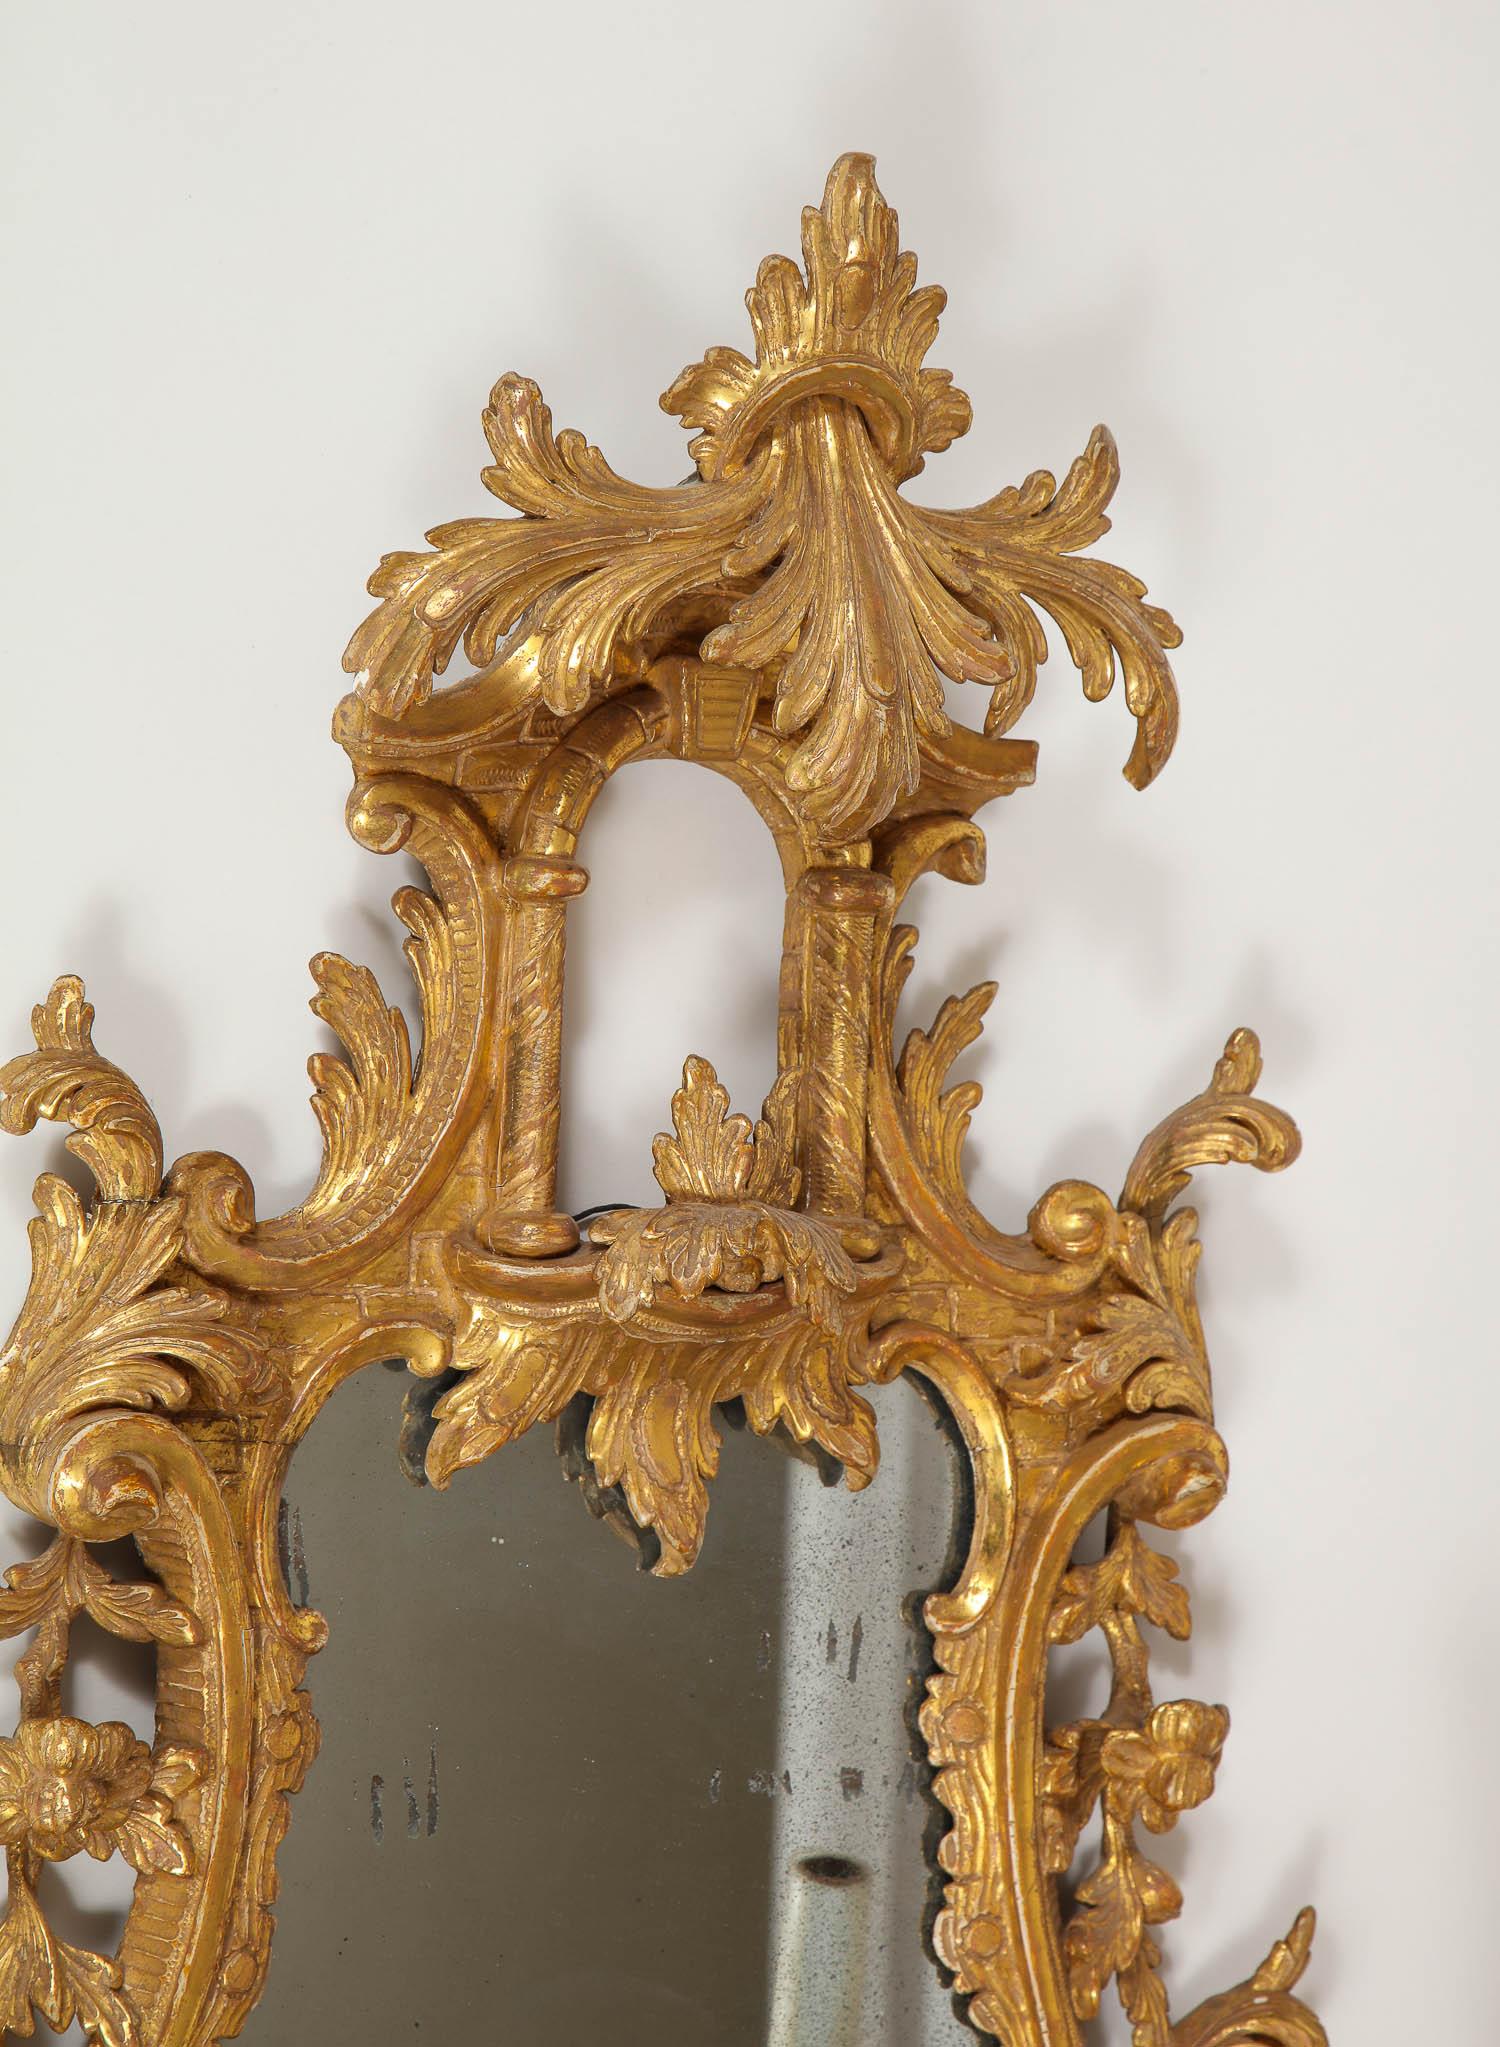 Pair of 18th Century English Giltwood Chinoiserie Mirrors with Candleholders For Sale 1